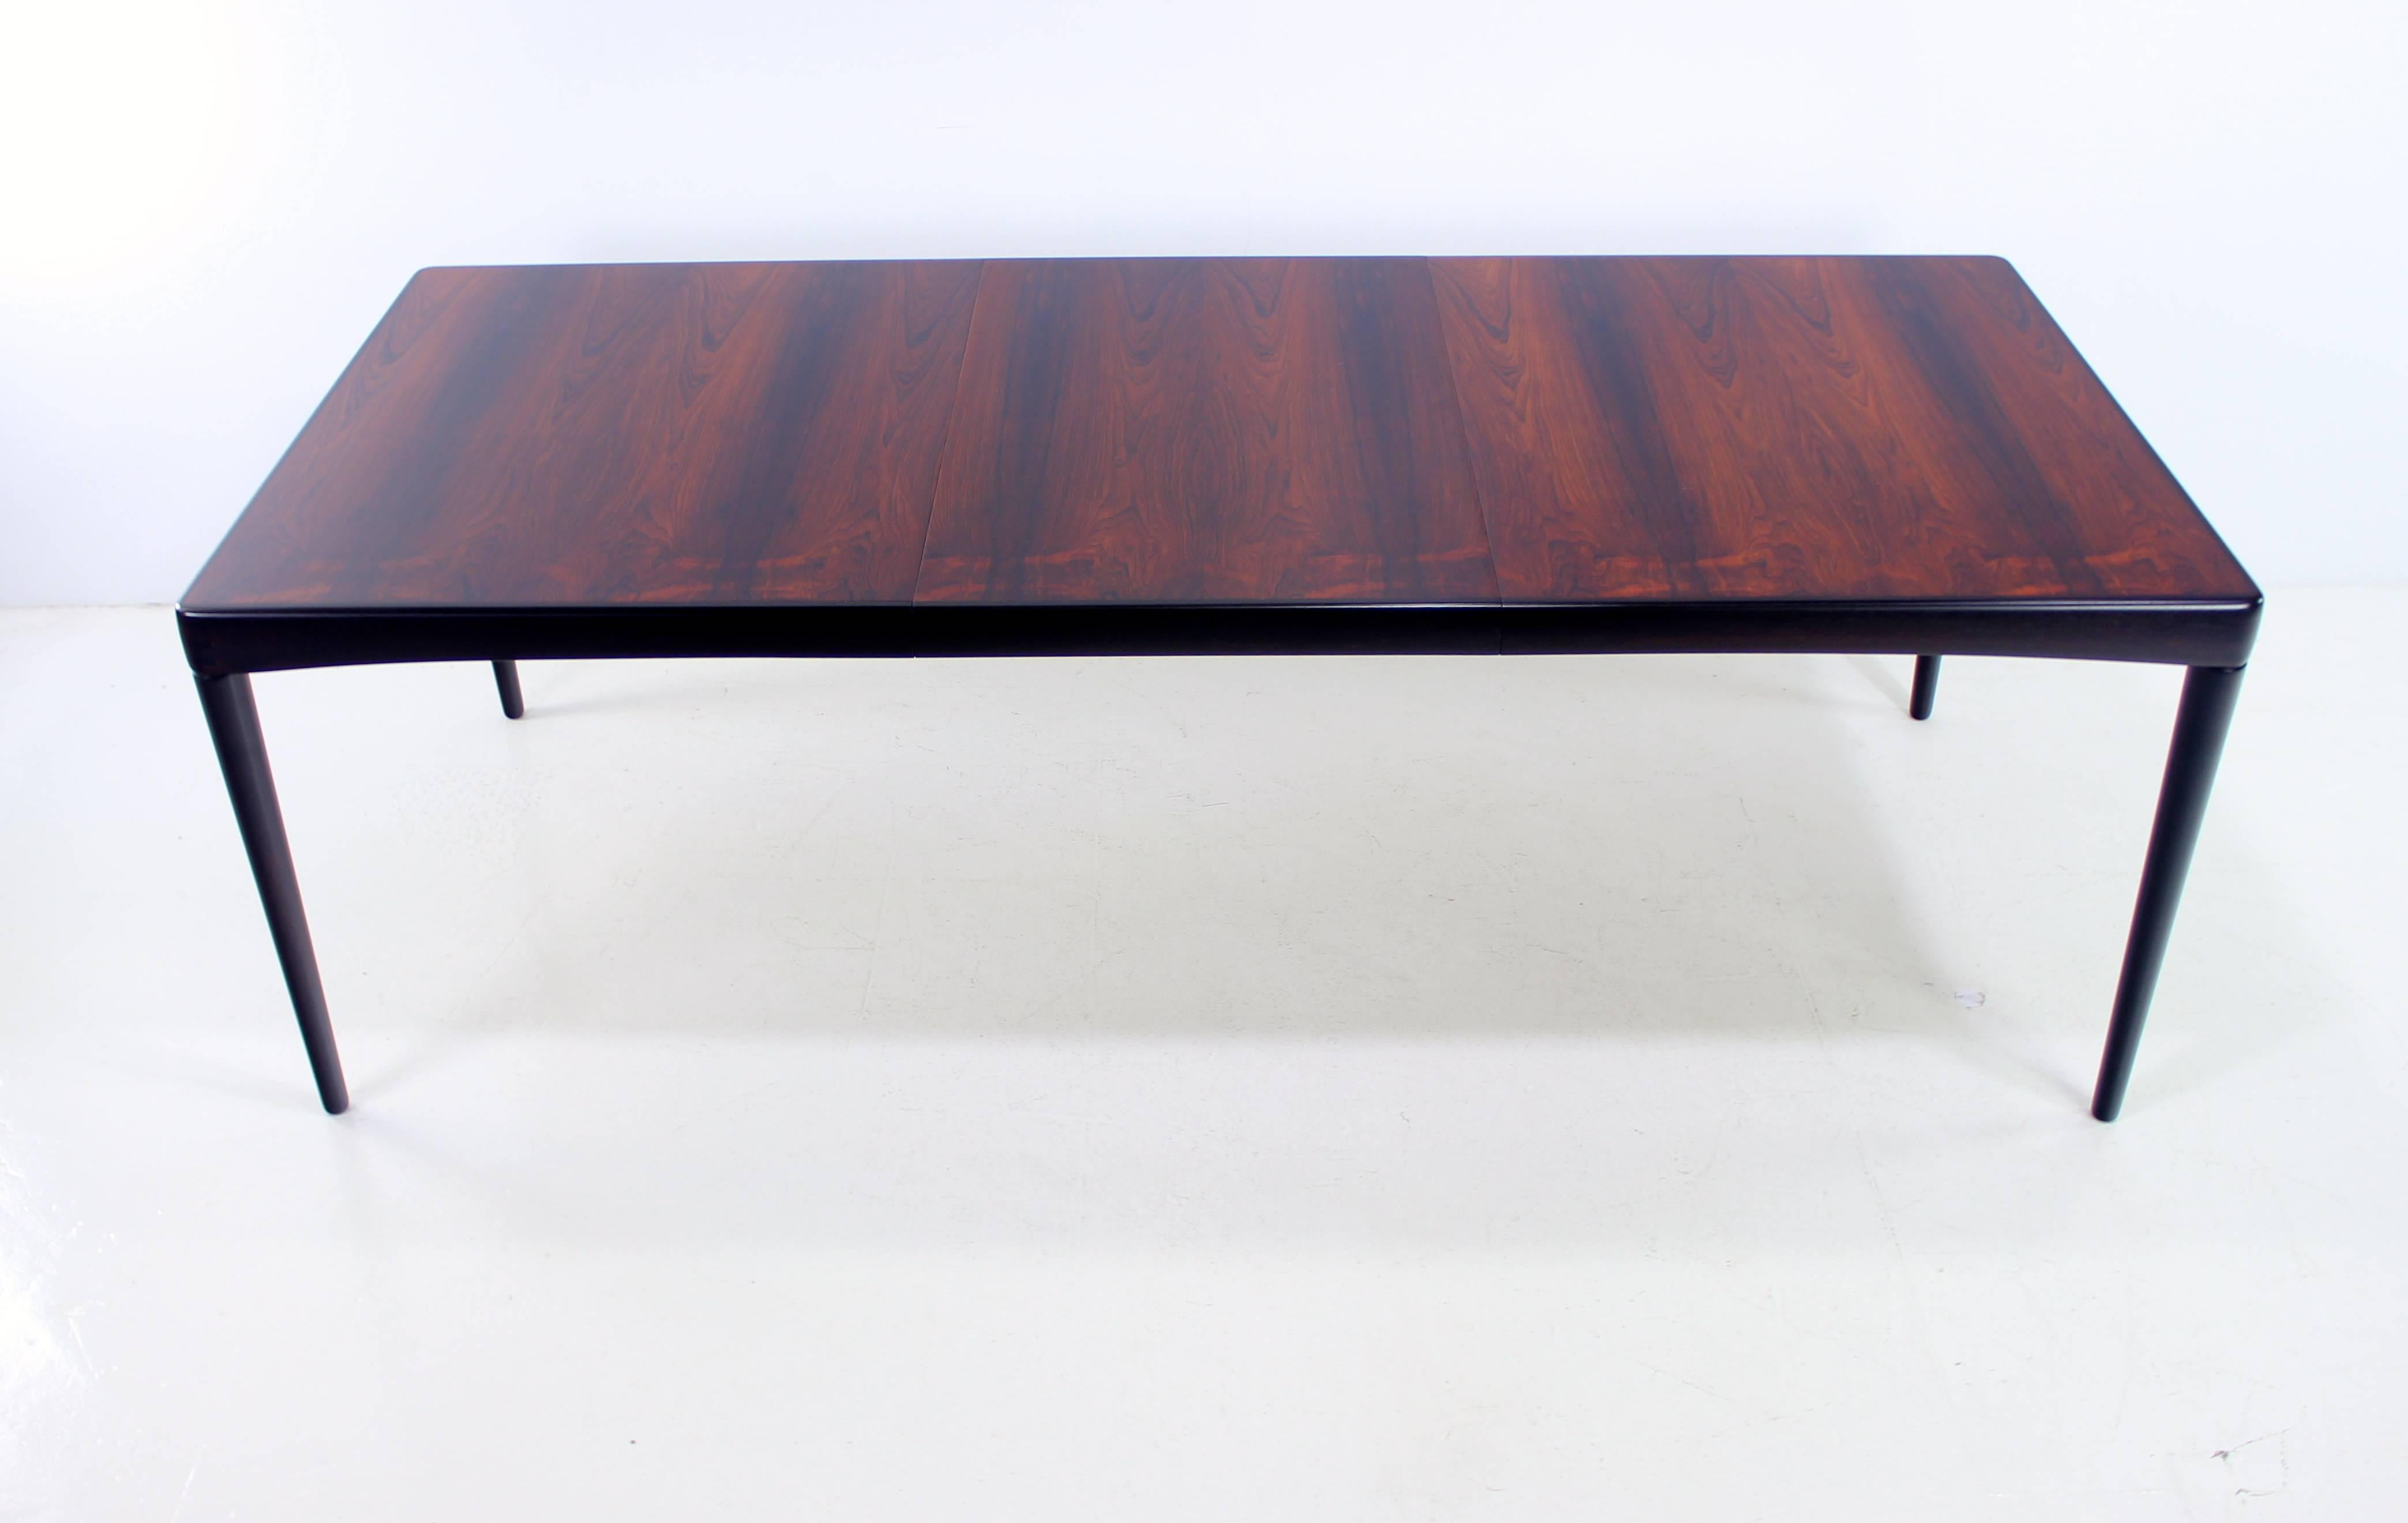 Danish modern dining table with one leaf designed in 1967 by H.W. Klein.
Bramin, maker.
Richly grained rosewood with inlaid wood on the corners.
Leaf measures 23.75" providing a full extension of 86.5".
Professionally restored and